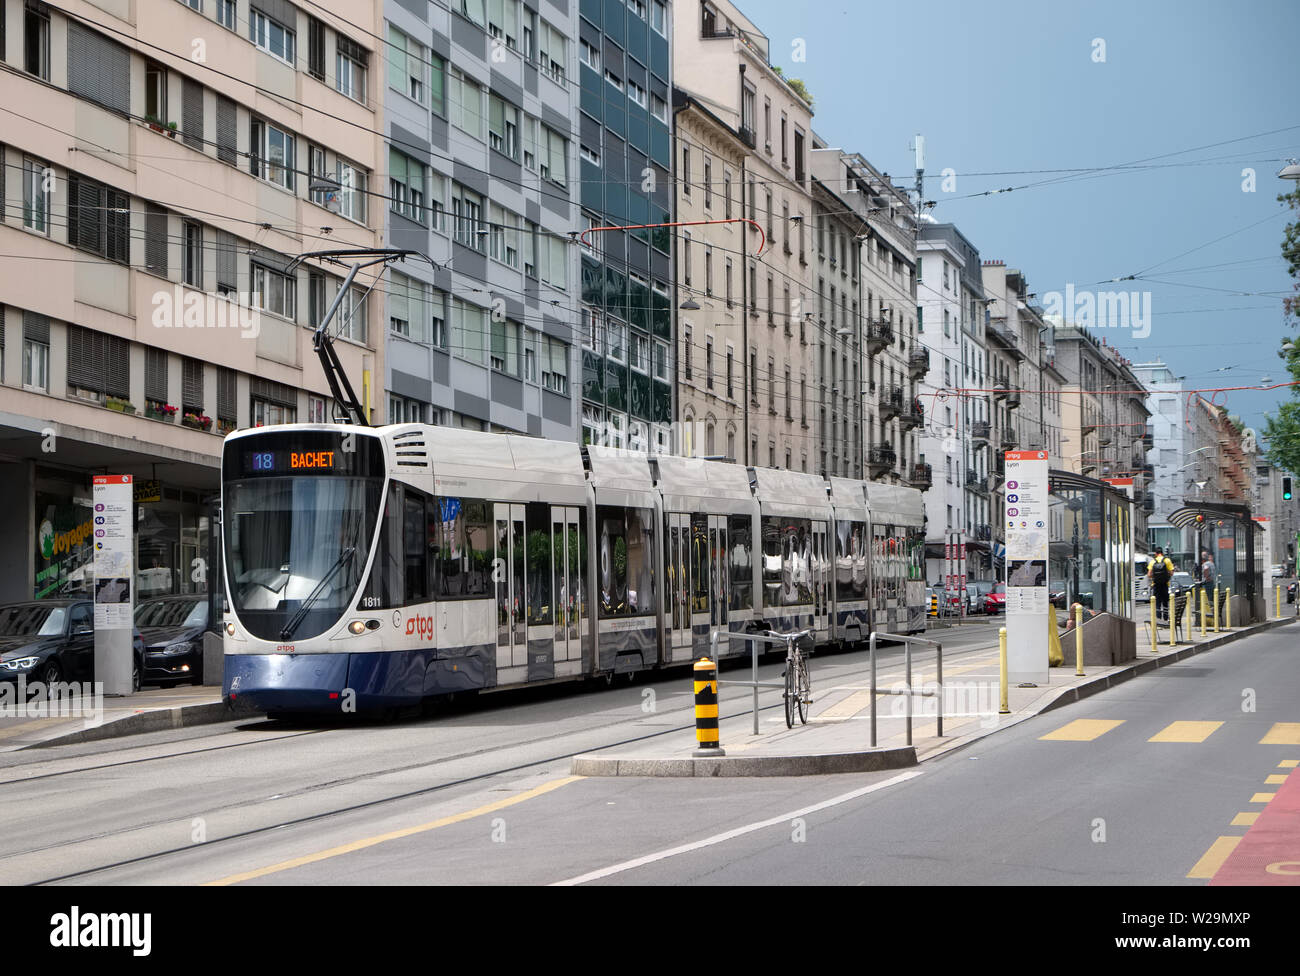 A TPG tram at a tram stop in the Servette area of Geneva Switzerland Stock Photo